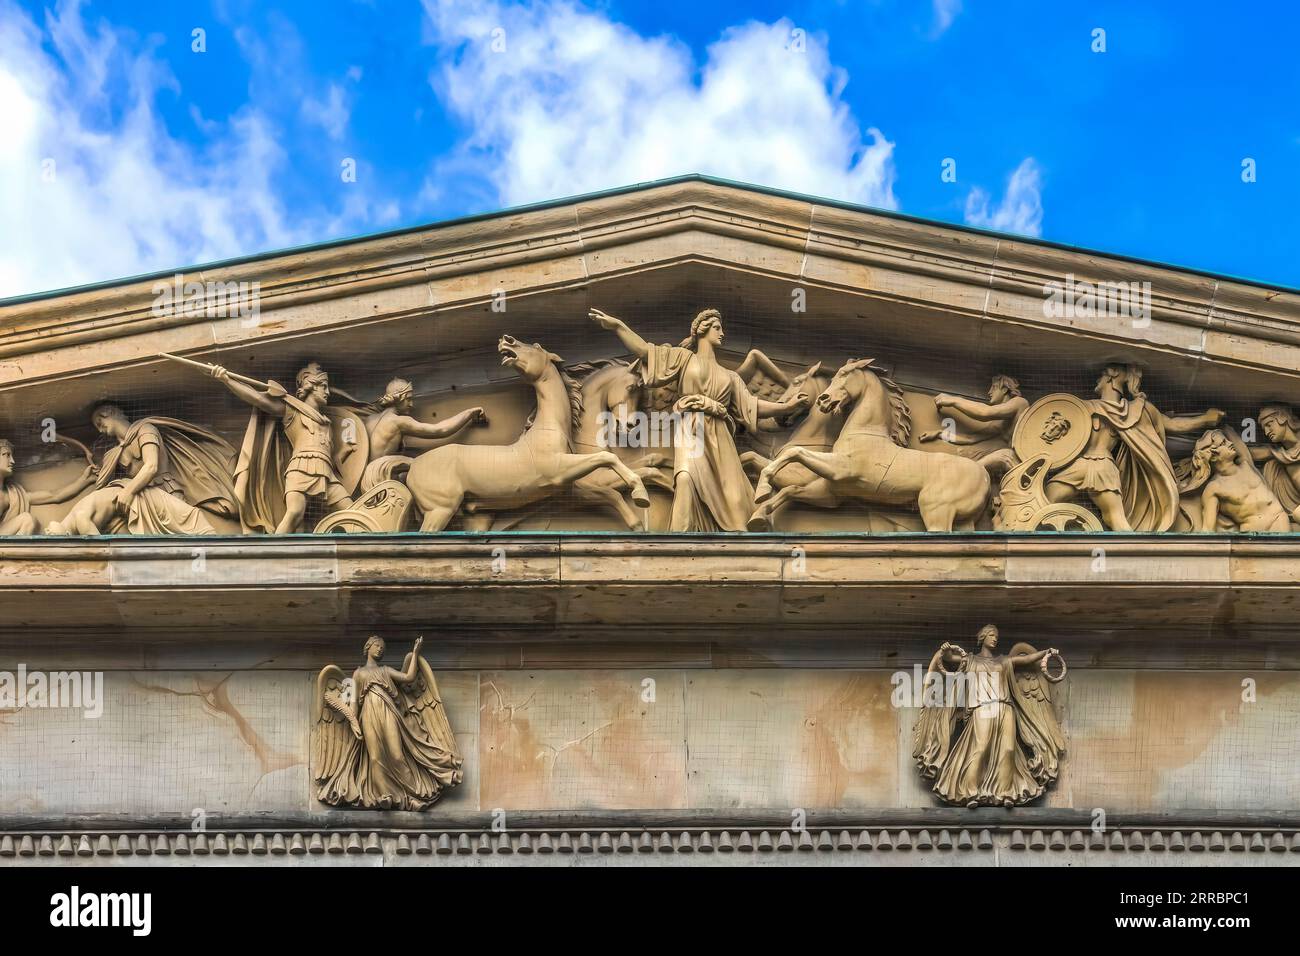 Facade Neue Wache Memorial Berlin Germany. Built in 1818.. After WW2 East German War Memorial against Fascism.  Now Memorial the Victims of War and Ty Stock Photo